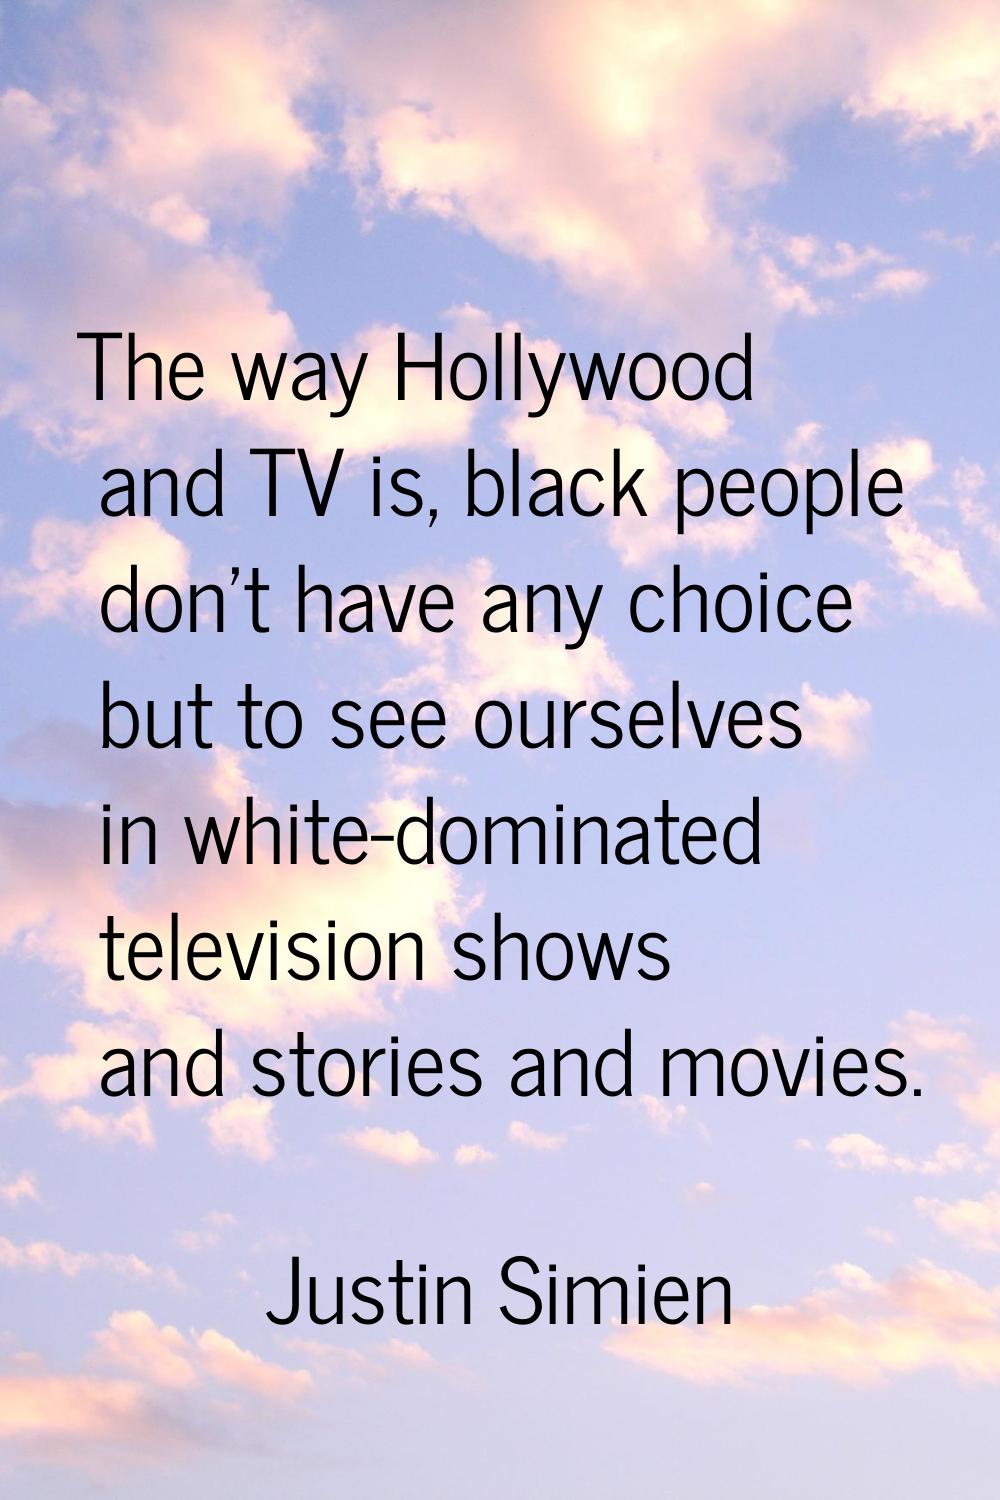 The way Hollywood and TV is, black people don't have any choice but to see ourselves in white-domin